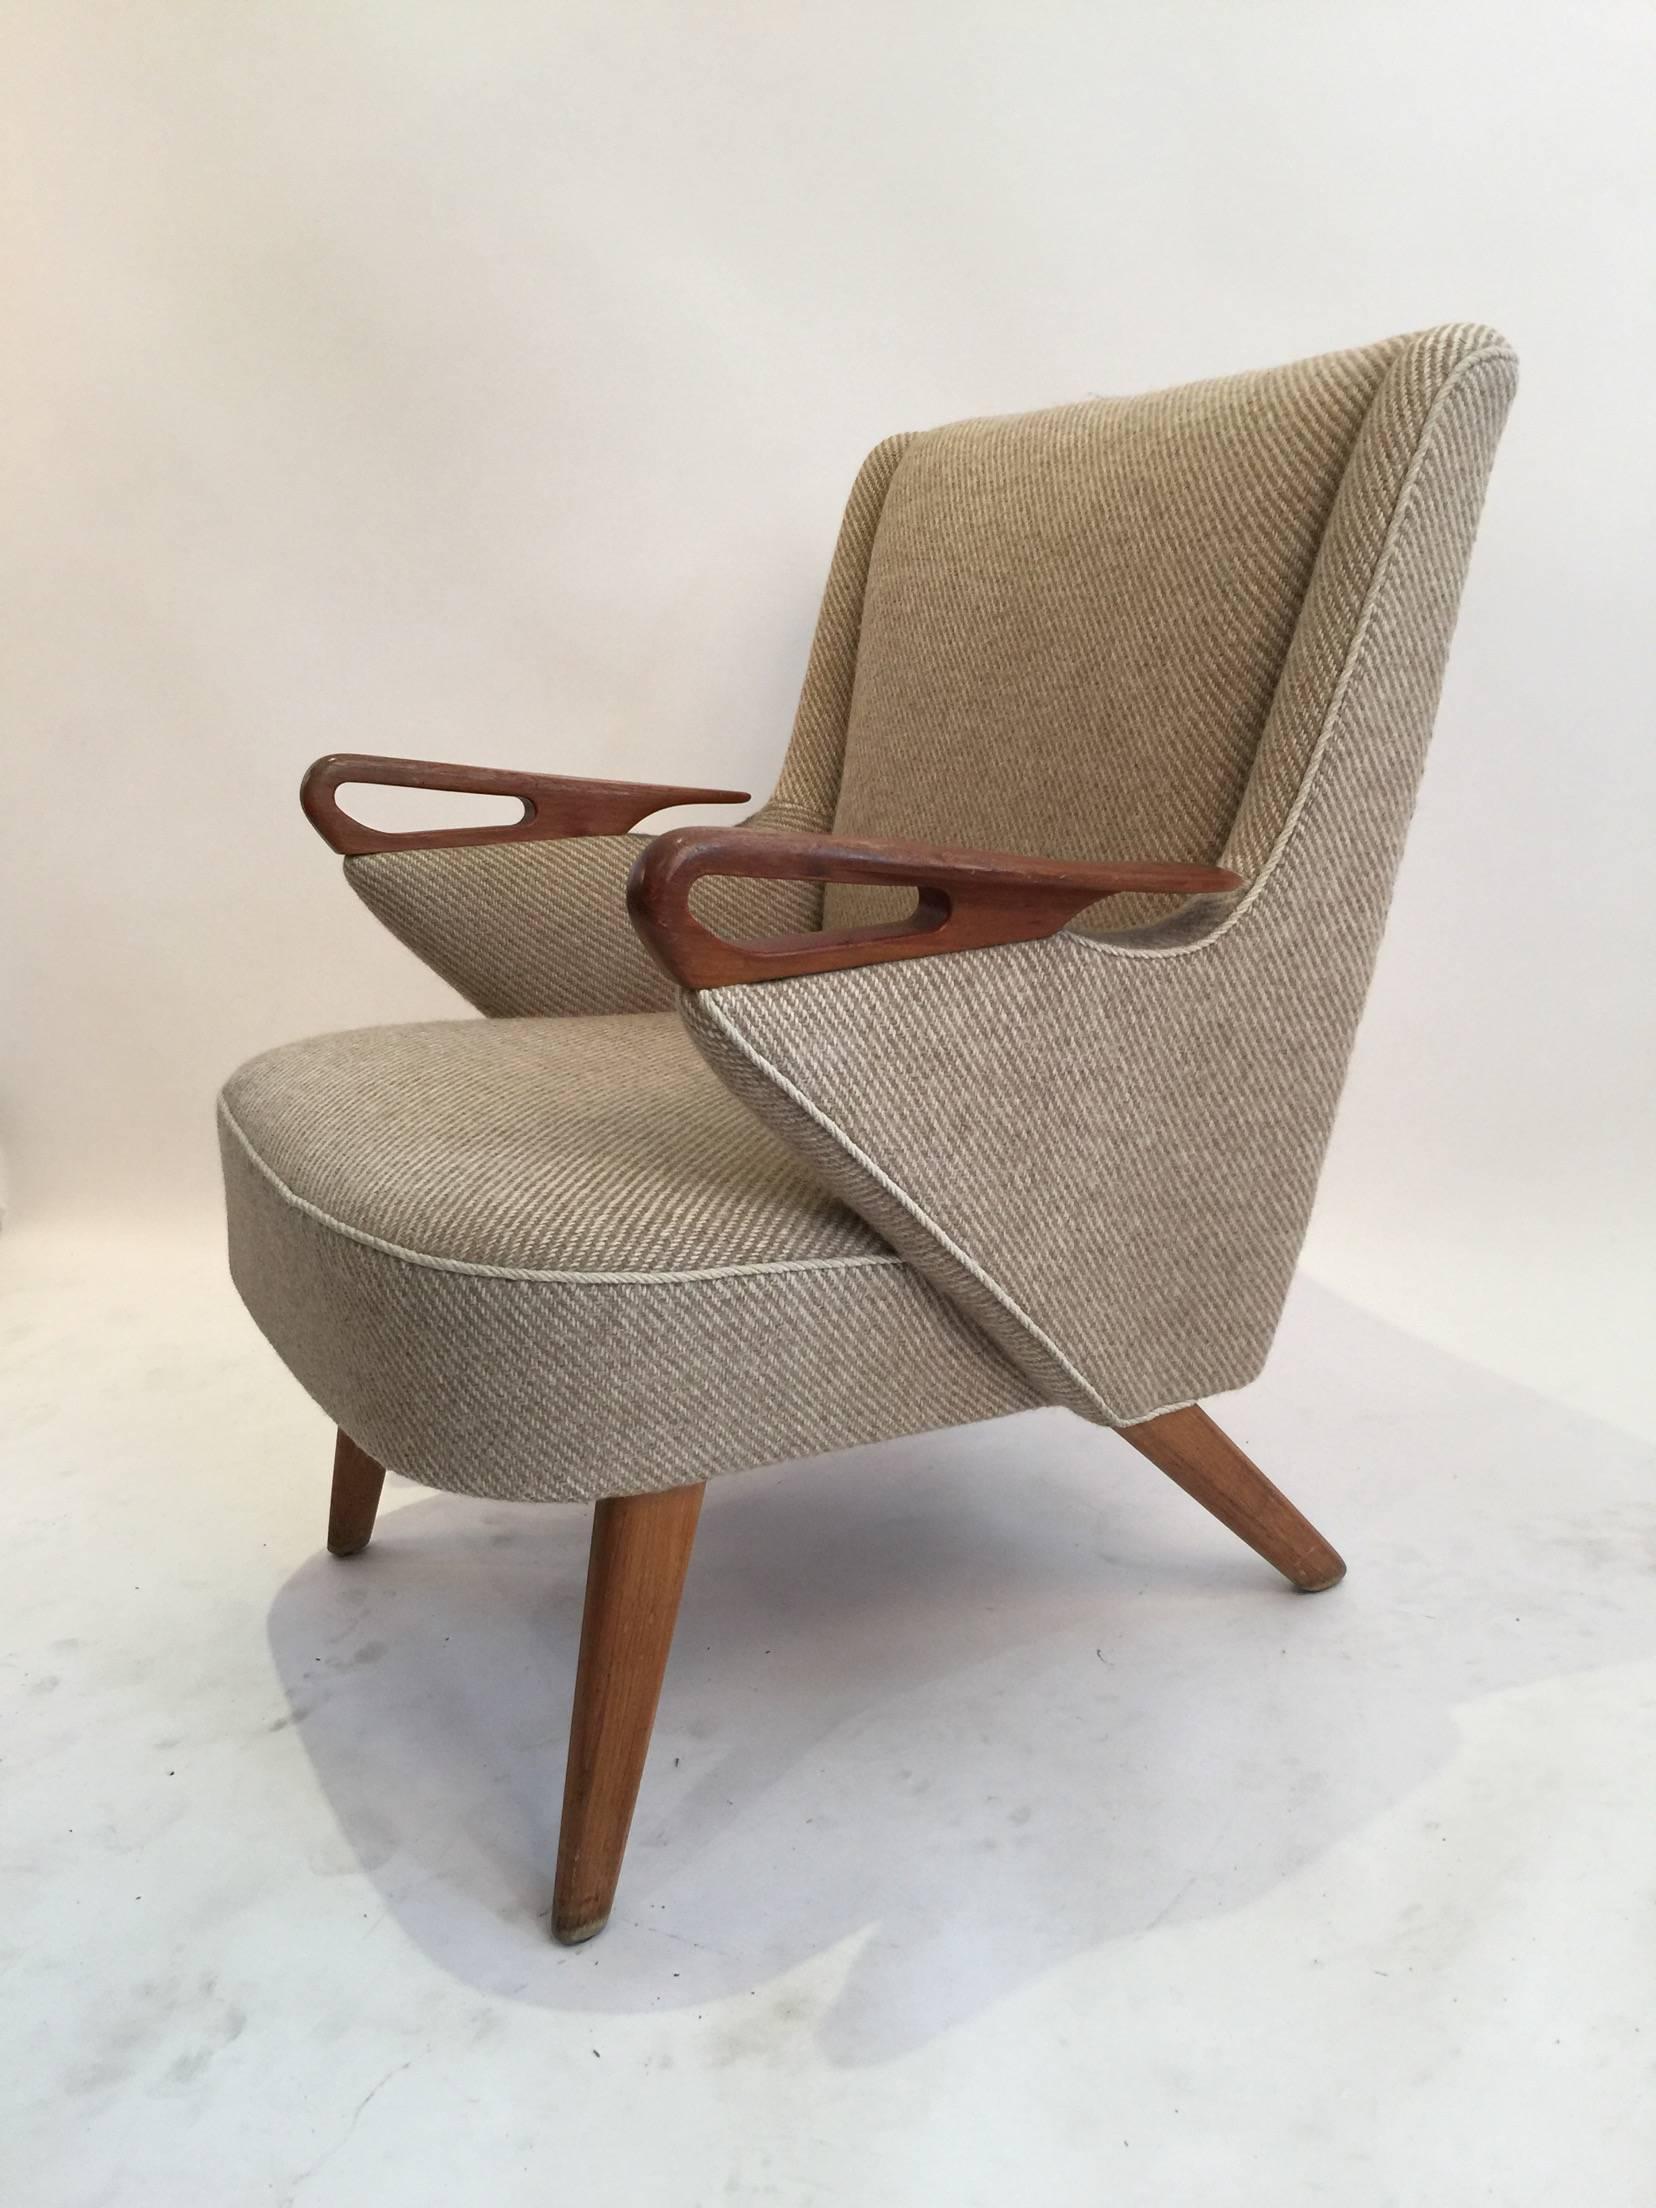 This Danish lounge chair is a unique piece from the Mid-Century Scandinavian Modern era. It is in its original two-tone beige wool twill upholstery and piping, features a flared back, teak legs and beautifully carved teak armrests. The design is